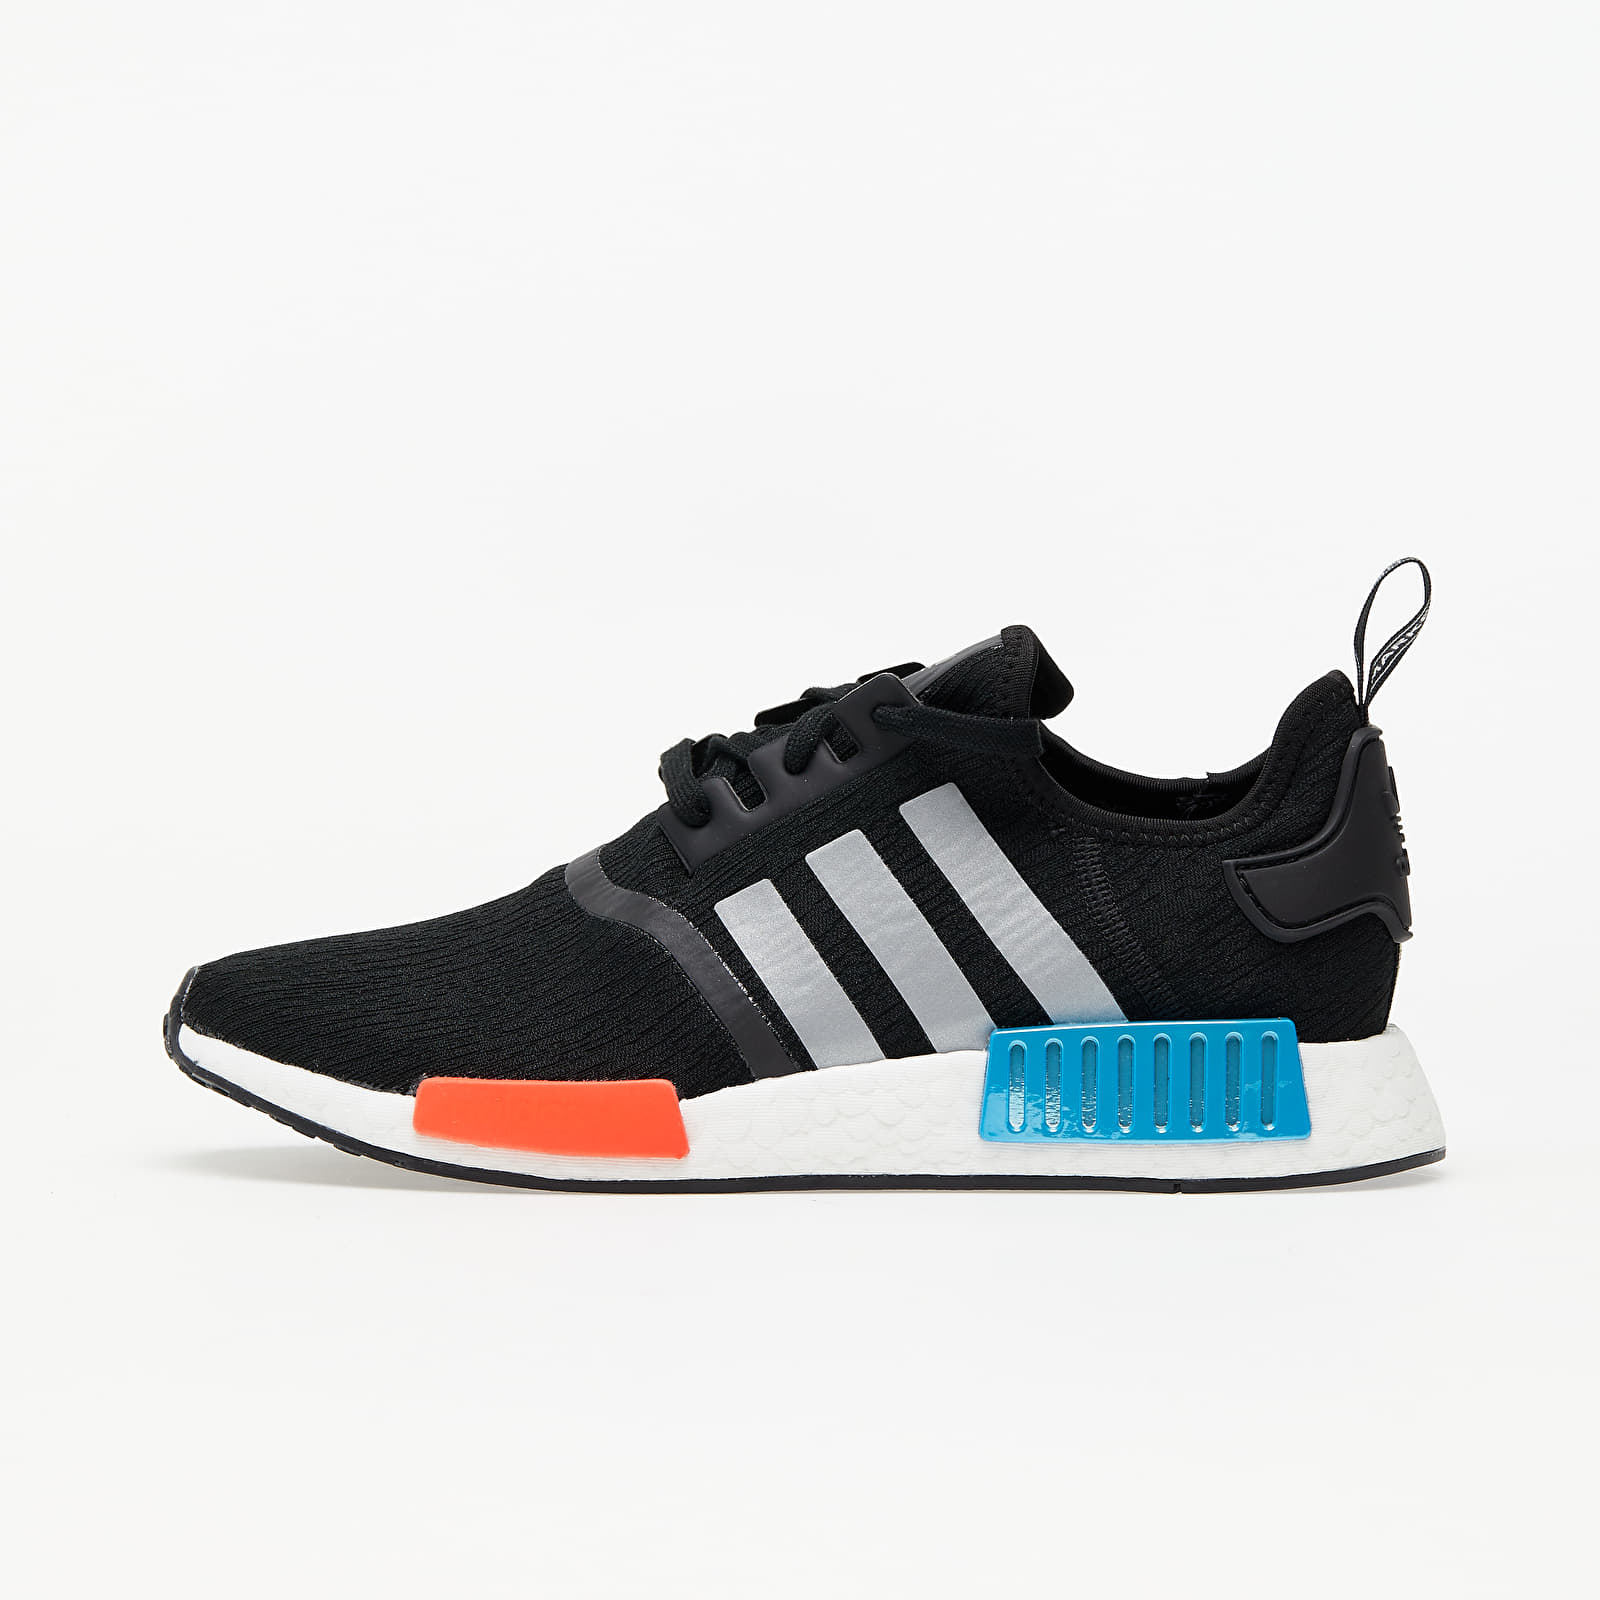 Women's shoes adidas NMD_R1 Core Black/ Silver Met./ Solar Red